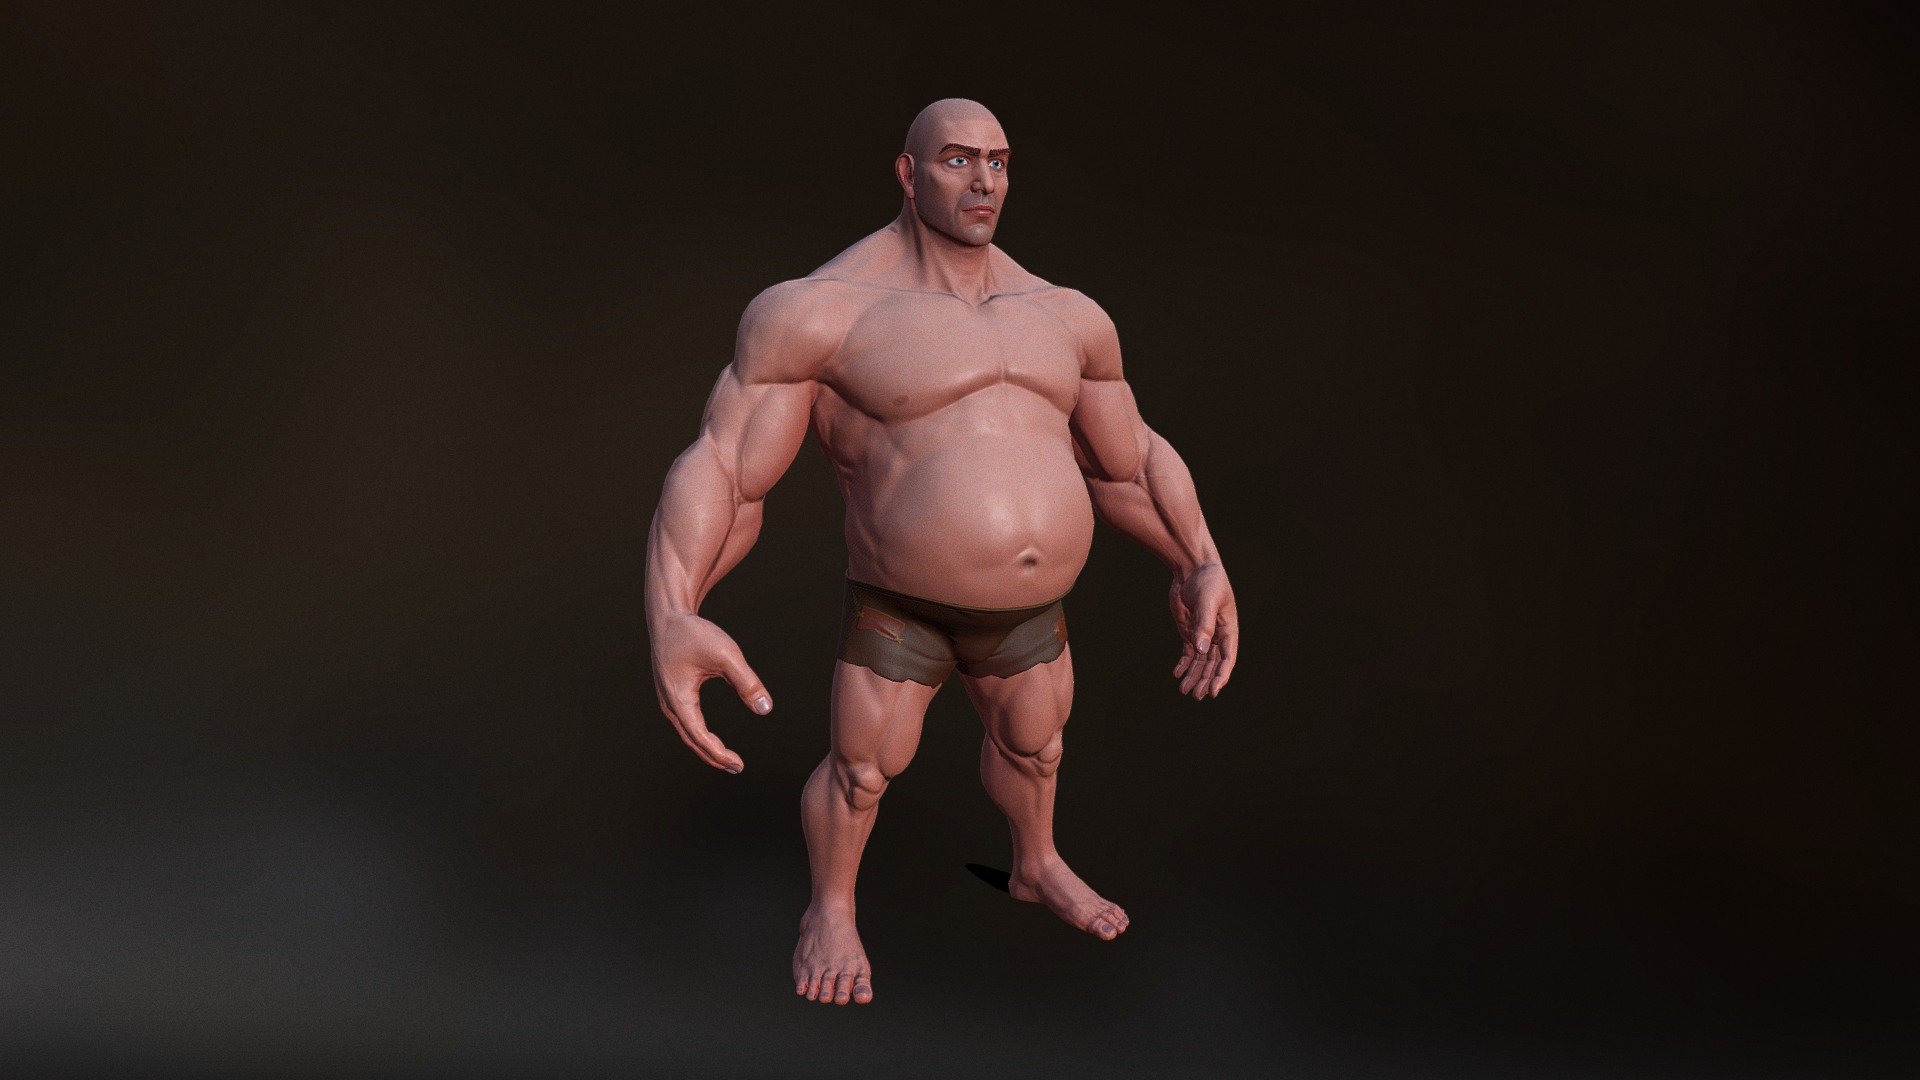 Stylized Fat Man Anatomy Game Model
Link Model:







https://artstn.co/m/p0583  &lt;&lt;&lt;




The file was created in Maya 2020 Arnold materials and bitmap images are also inside.

Game ready model at 42K Tris + UV + Texture + OBJ + FBX.

I listen to all questions and requests, thank you - Stylized Fat Man Anatomy Game Model - Buy Royalty Free 3D model by Cau Hi (@nt.chitam) 3d model